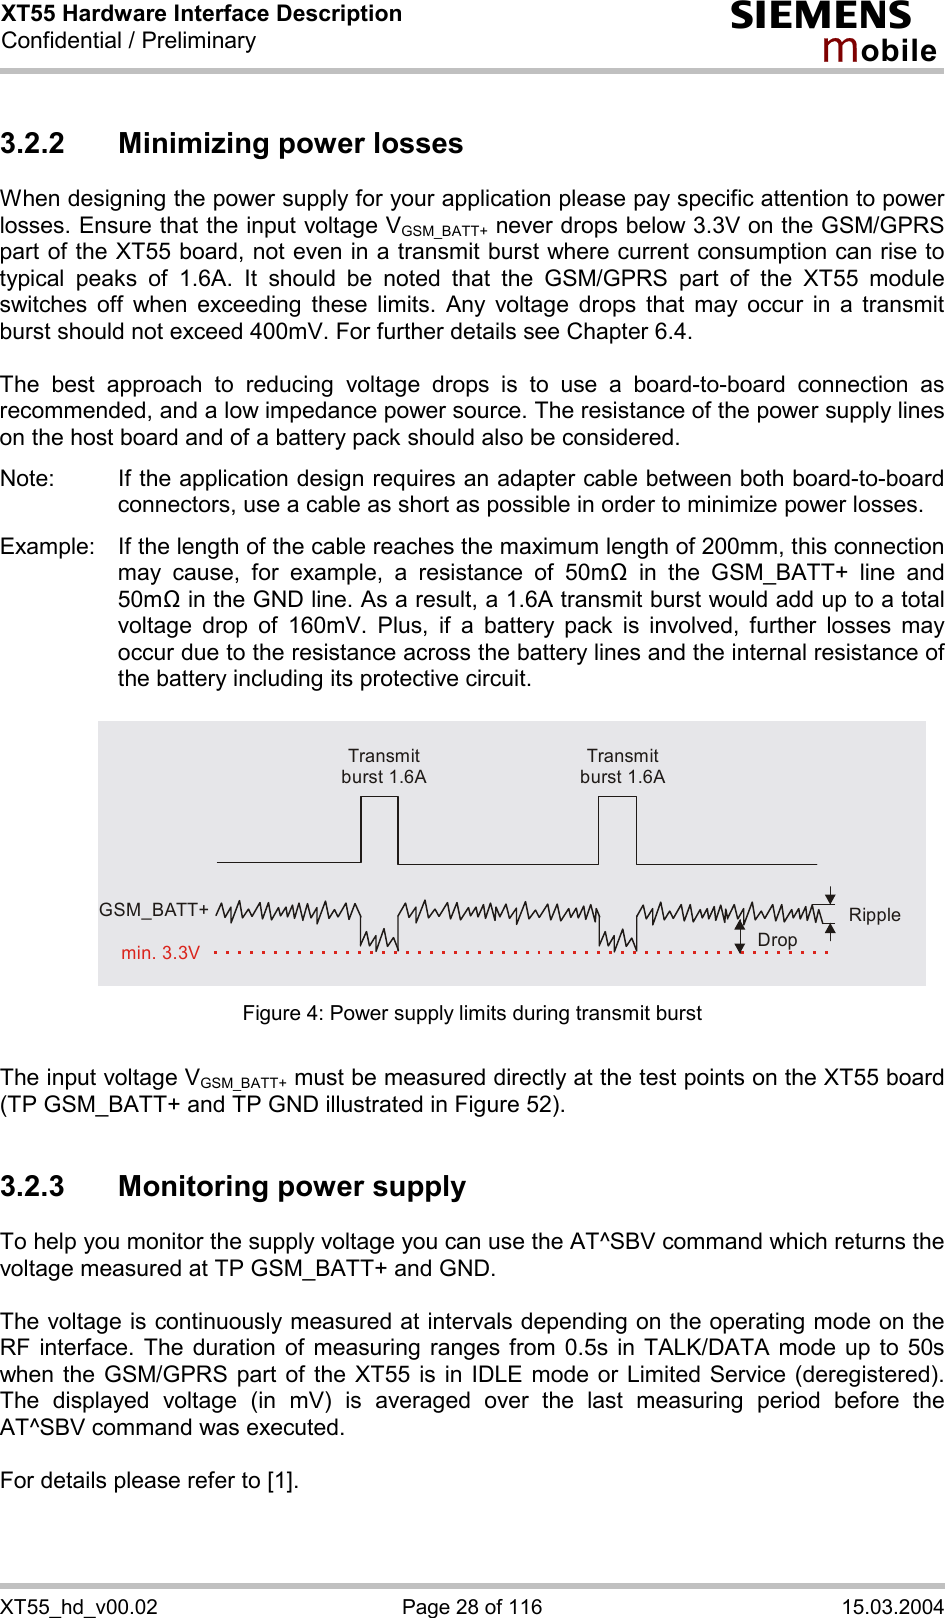 XT55 Hardware Interface Description Confidential / Preliminary s mo b i l e XT55_hd_v00.02  Page 28 of 116  15.03.2004 3.2.2 Minimizing power losses When designing the power supply for your application please pay specific attention to power losses. Ensure that the input voltage VGSM_BATT+ never drops below 3.3V on the GSM/GPRS part of the XT55 board, not even in a transmit burst where current consumption can rise to typical peaks of 1.6A. It should be noted that the GSM/GPRS part of the XT55 module switches off when exceeding these limits. Any voltage drops that may occur in a transmit burst should not exceed 400mV. For further details see Chapter 6.4.  The best approach to reducing voltage drops is to use a board-to-board connection as recommended, and a low impedance power source. The resistance of the power supply lines on the host board and of a battery pack should also be considered.  Note:  If the application design requires an adapter cable between both board-to-board connectors, use a cable as short as possible in order to minimize power losses.   Example:  If the length of the cable reaches the maximum length of 200mm, this connection may cause, for example, a resistance of 50m! in the GSM_BATT+ line and 50m! in the GND line. As a result, a 1.6A transmit burst would add up to a total voltage drop of 160mV. Plus, if a battery pack is involved, further losses may occur due to the resistance across the battery lines and the internal resistance of the battery including its protective circuit.    Transmit burst 1.6ATransmit burst 1.6ARippleDropmin. 3.3VGSM_BATT+ Figure 4: Power supply limits during transmit burst  The input voltage VGSM_BATT+ must be measured directly at the test points on the XT55 board (TP GSM_BATT+ and TP GND illustrated in Figure 52).  3.2.3  Monitoring power supply To help you monitor the supply voltage you can use the AT^SBV command which returns the voltage measured at TP GSM_BATT+ and GND.   The voltage is continuously measured at intervals depending on the operating mode on the RF interface. The duration of measuring ranges from 0.5s in TALK/DATA mode up to 50s when the GSM/GPRS part of the XT55 is in IDLE mode or Limited Service (deregistered). The displayed voltage (in mV) is averaged over the last measuring period before the AT^SBV command was executed.   For details please refer to [1].  